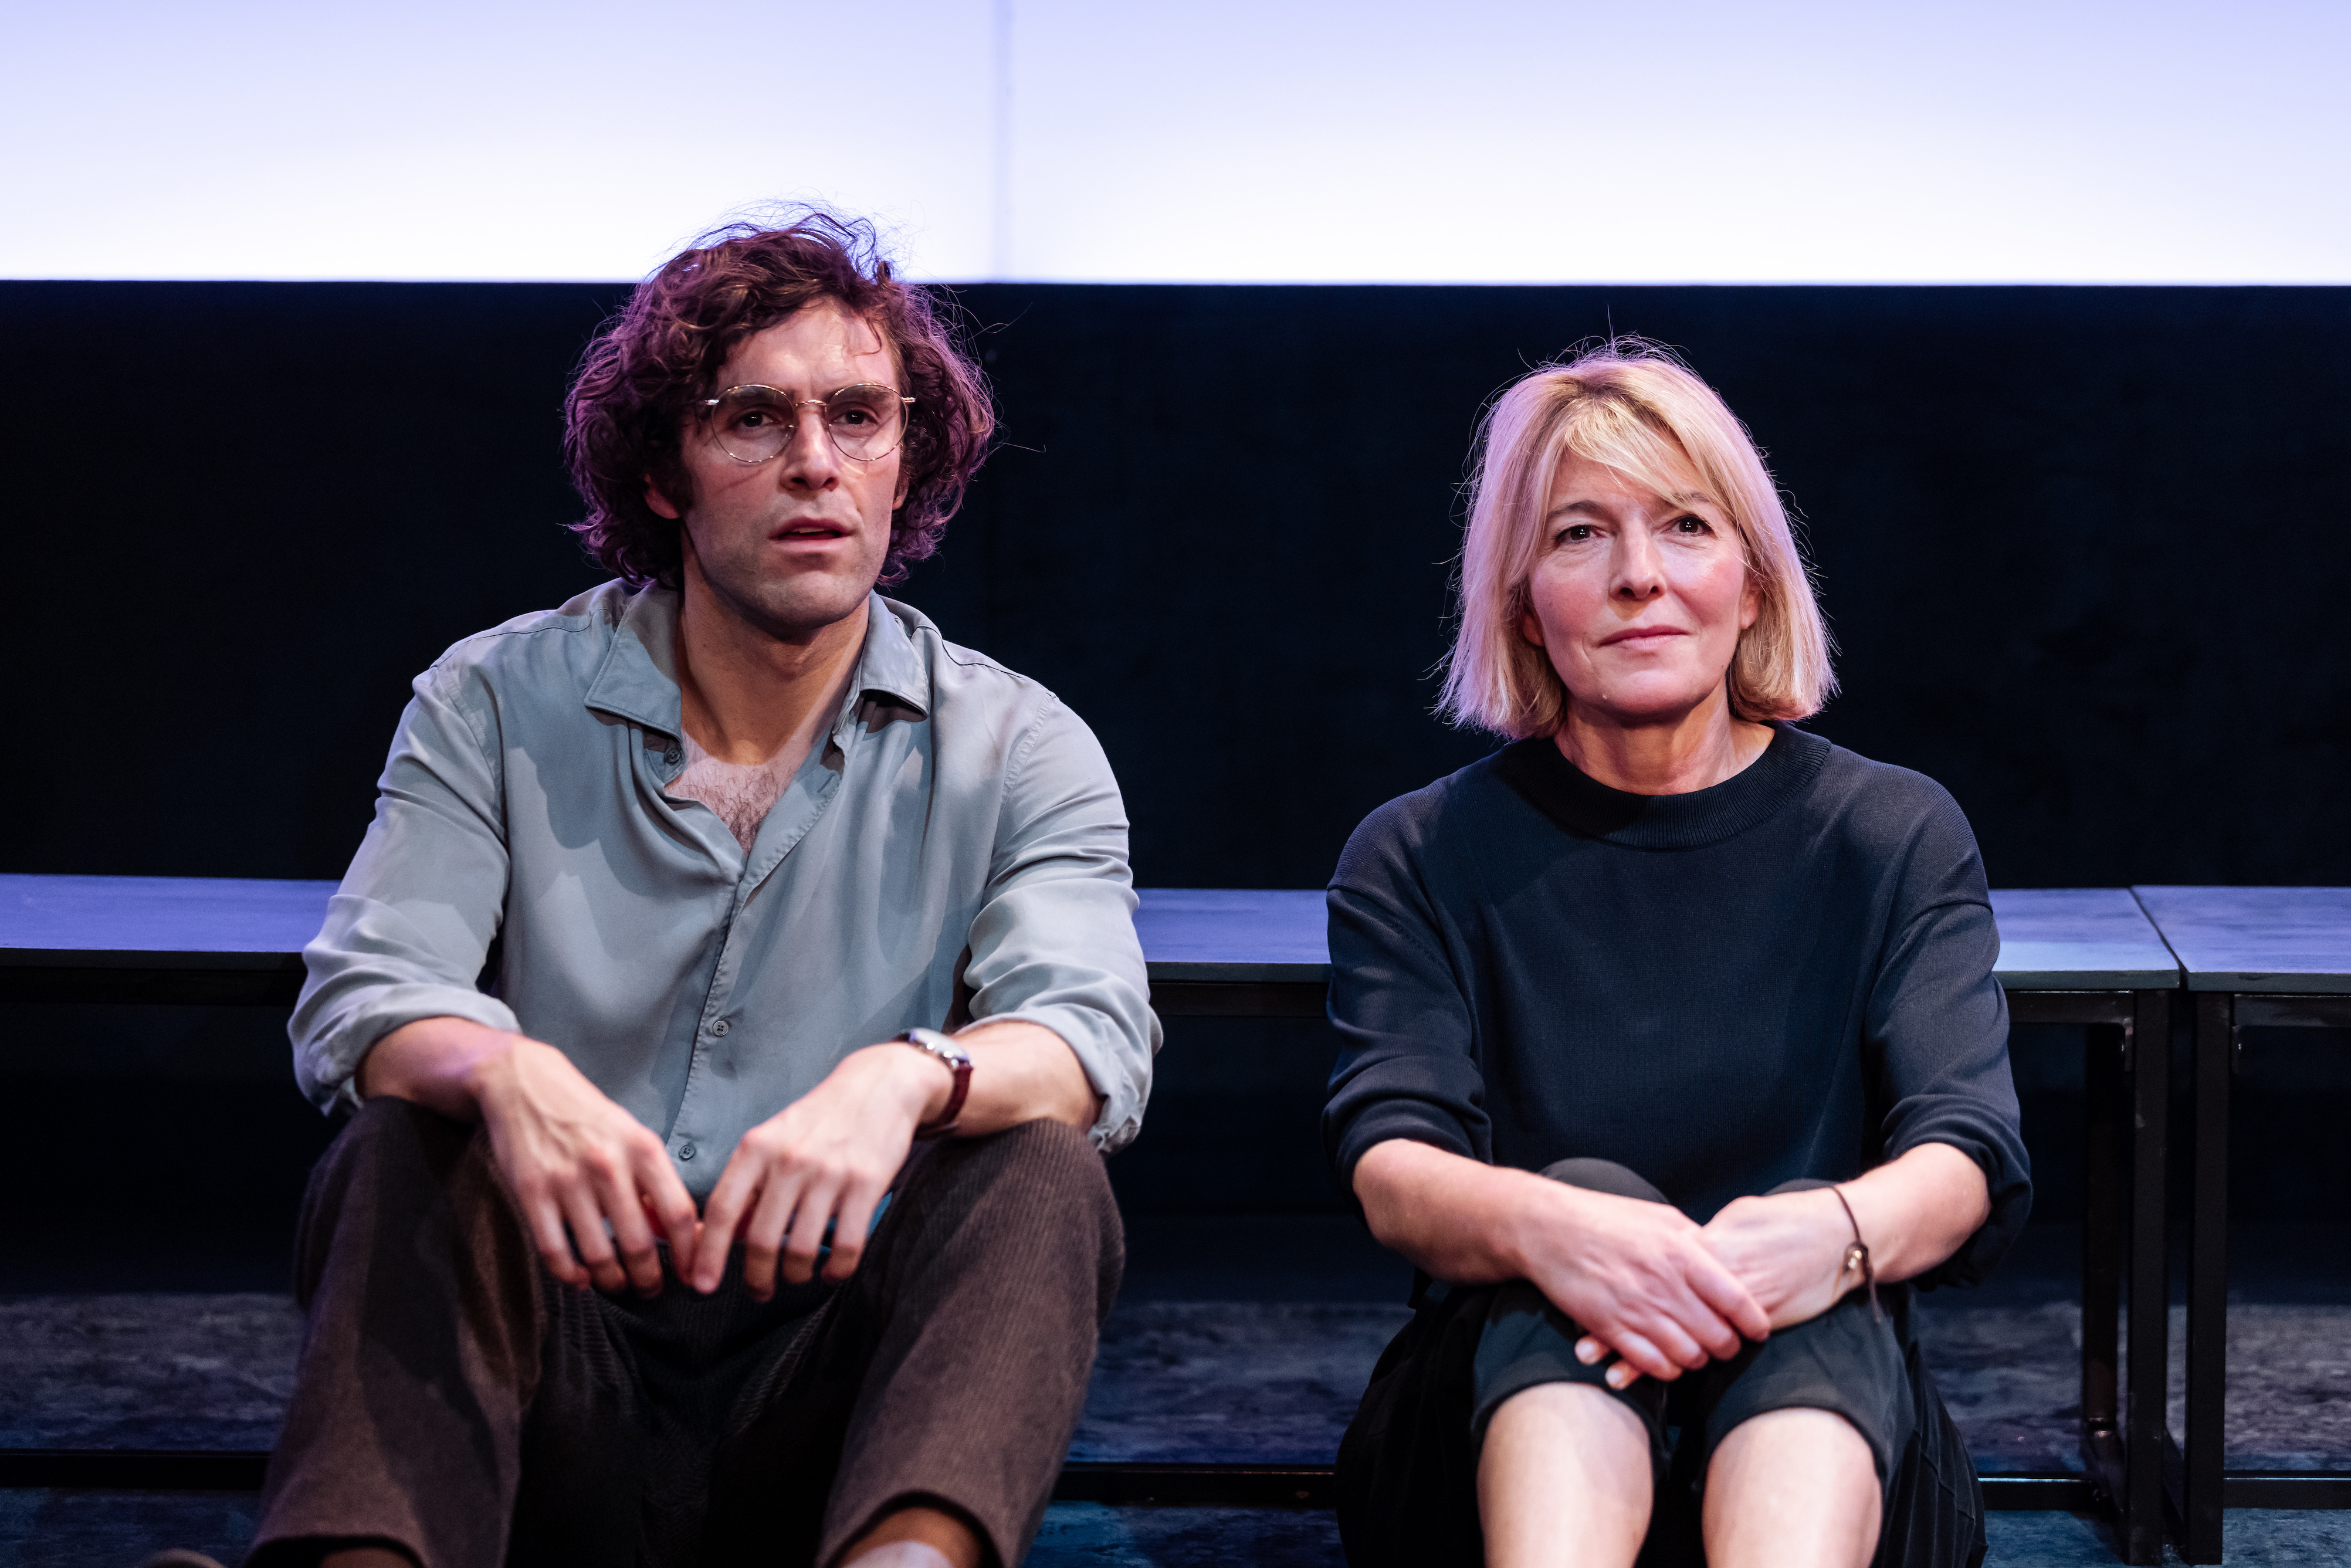 Ewan Miller and Jemma Redgrave in a scene from Octopolis at Hampstead Theatre